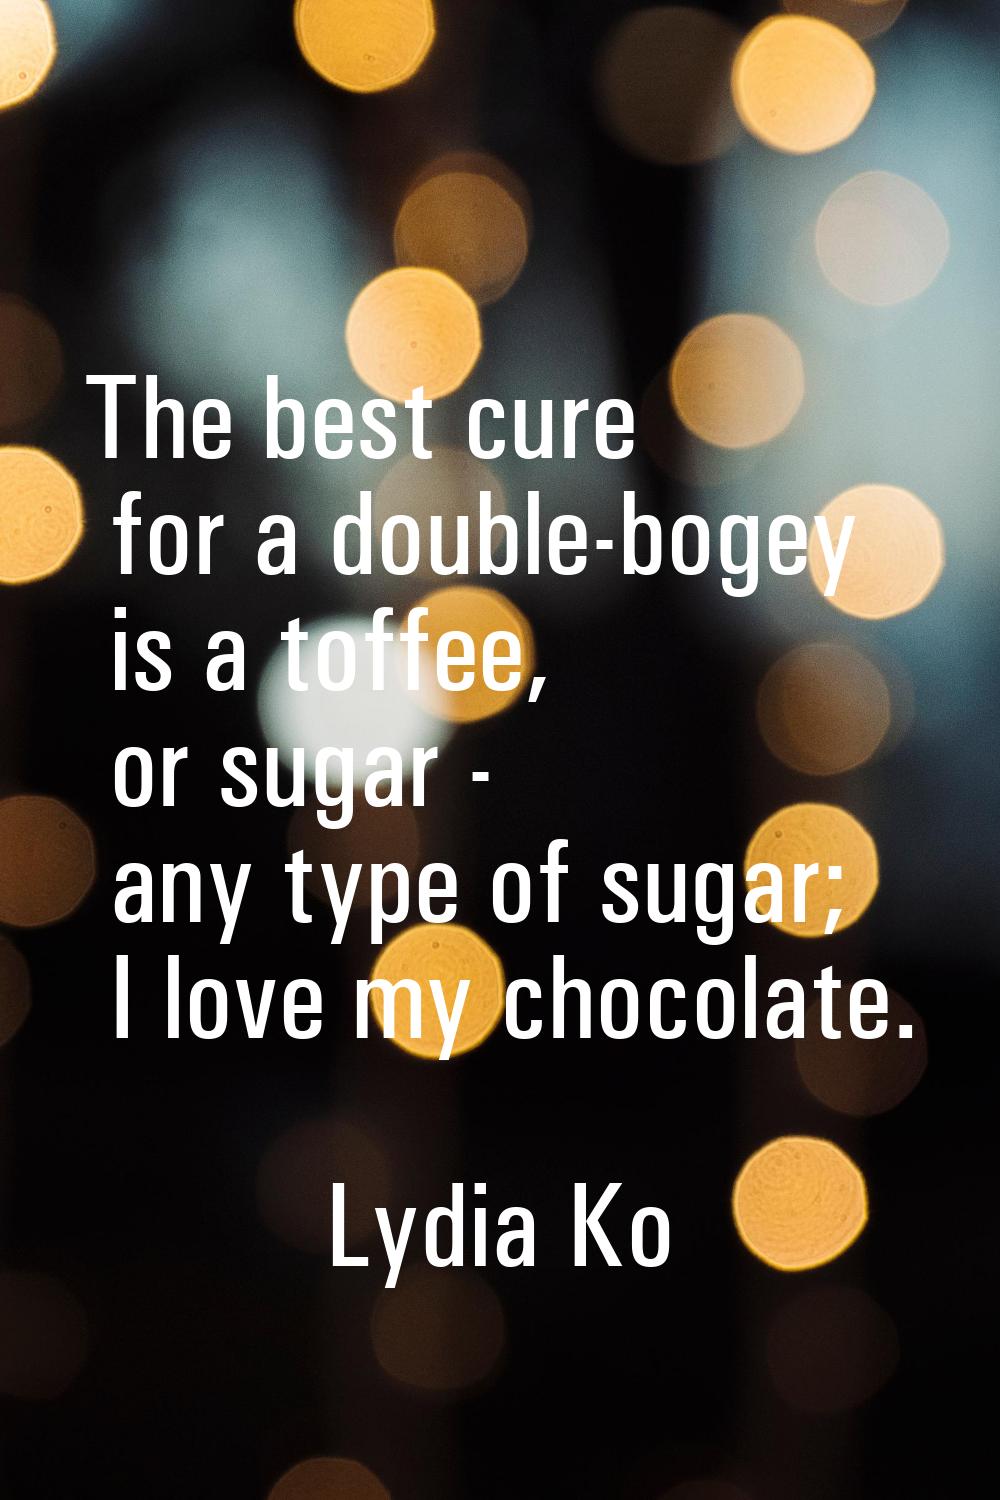 The best cure for a double-bogey is a toffee, or sugar - any type of sugar; I love my chocolate.